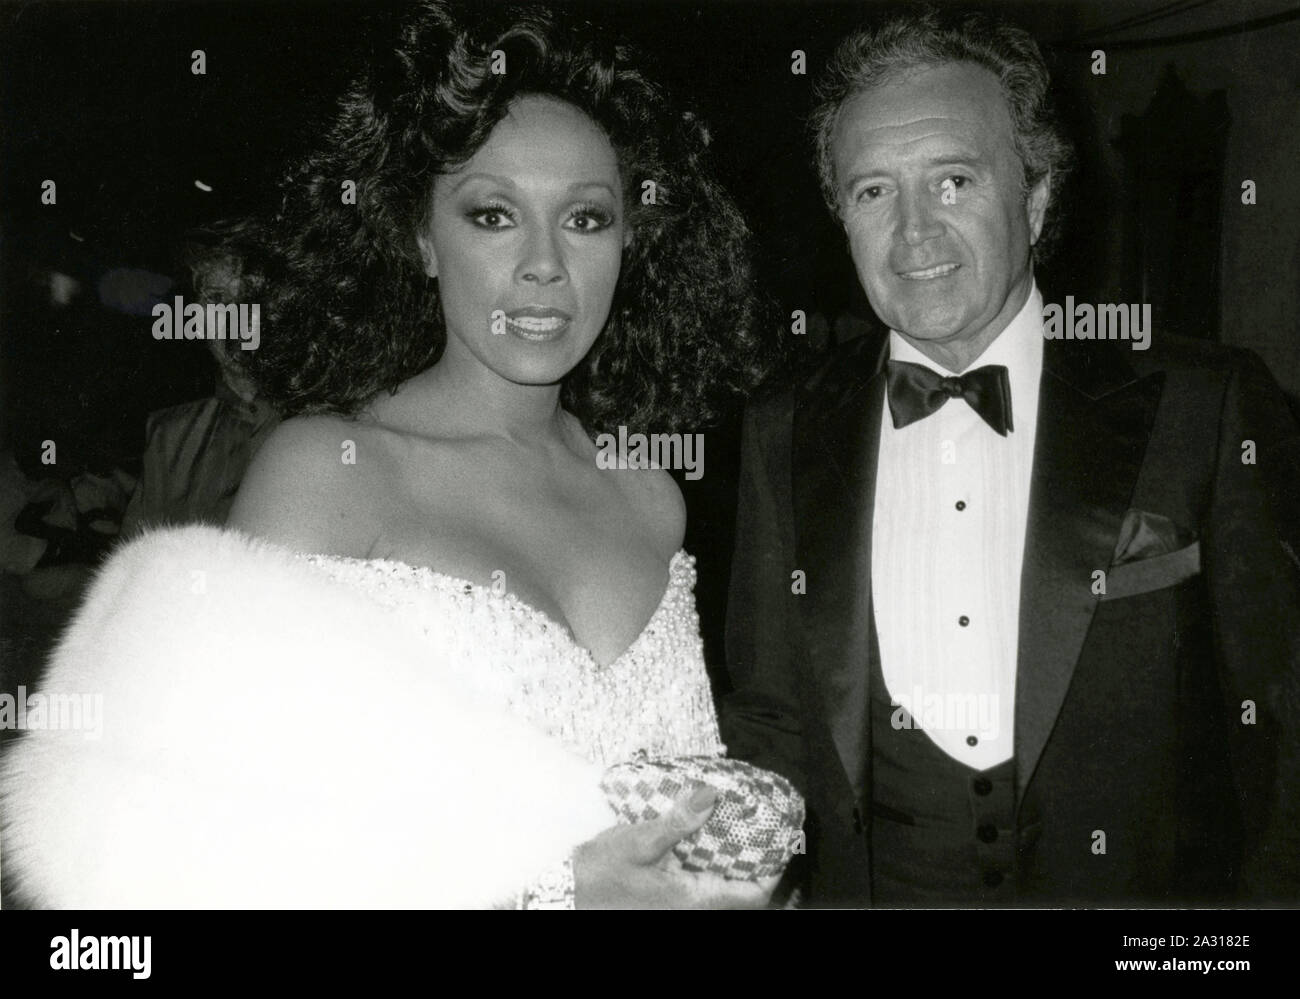 ***FILE PHOTO*** Diahann Carroll Has Passed Away At 84. Diahann Carroll and Vic Damone during 38th Annual Primetime Emmy Awards at Pasadena Civic Auditorium in Pasadena, California, United States. 9/21/1986 Credit: Walter McBride/MediaPunch Stock Photo